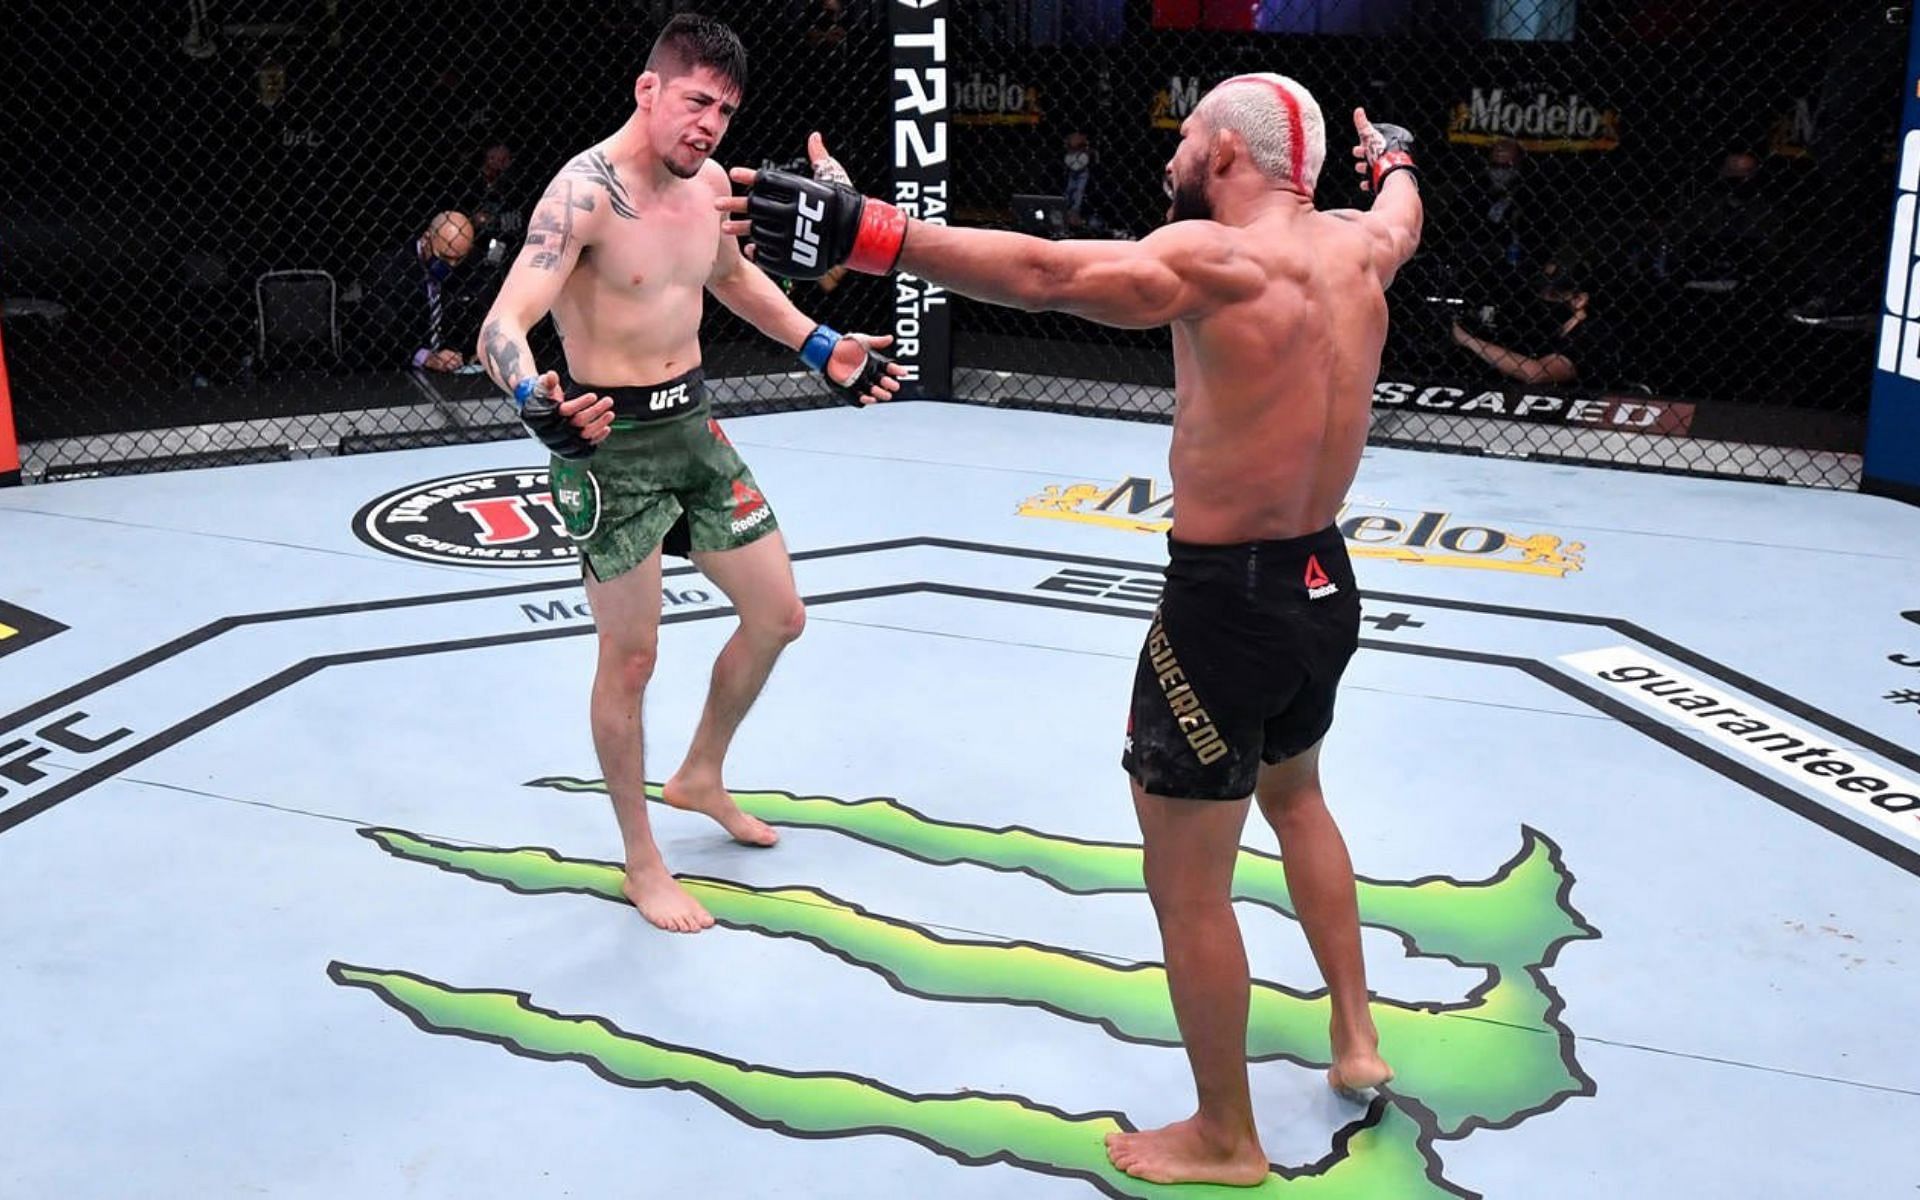 Twitter reacts to the slugfest between Brandon Moreno and Deiveson Figueiredo at UFC 270